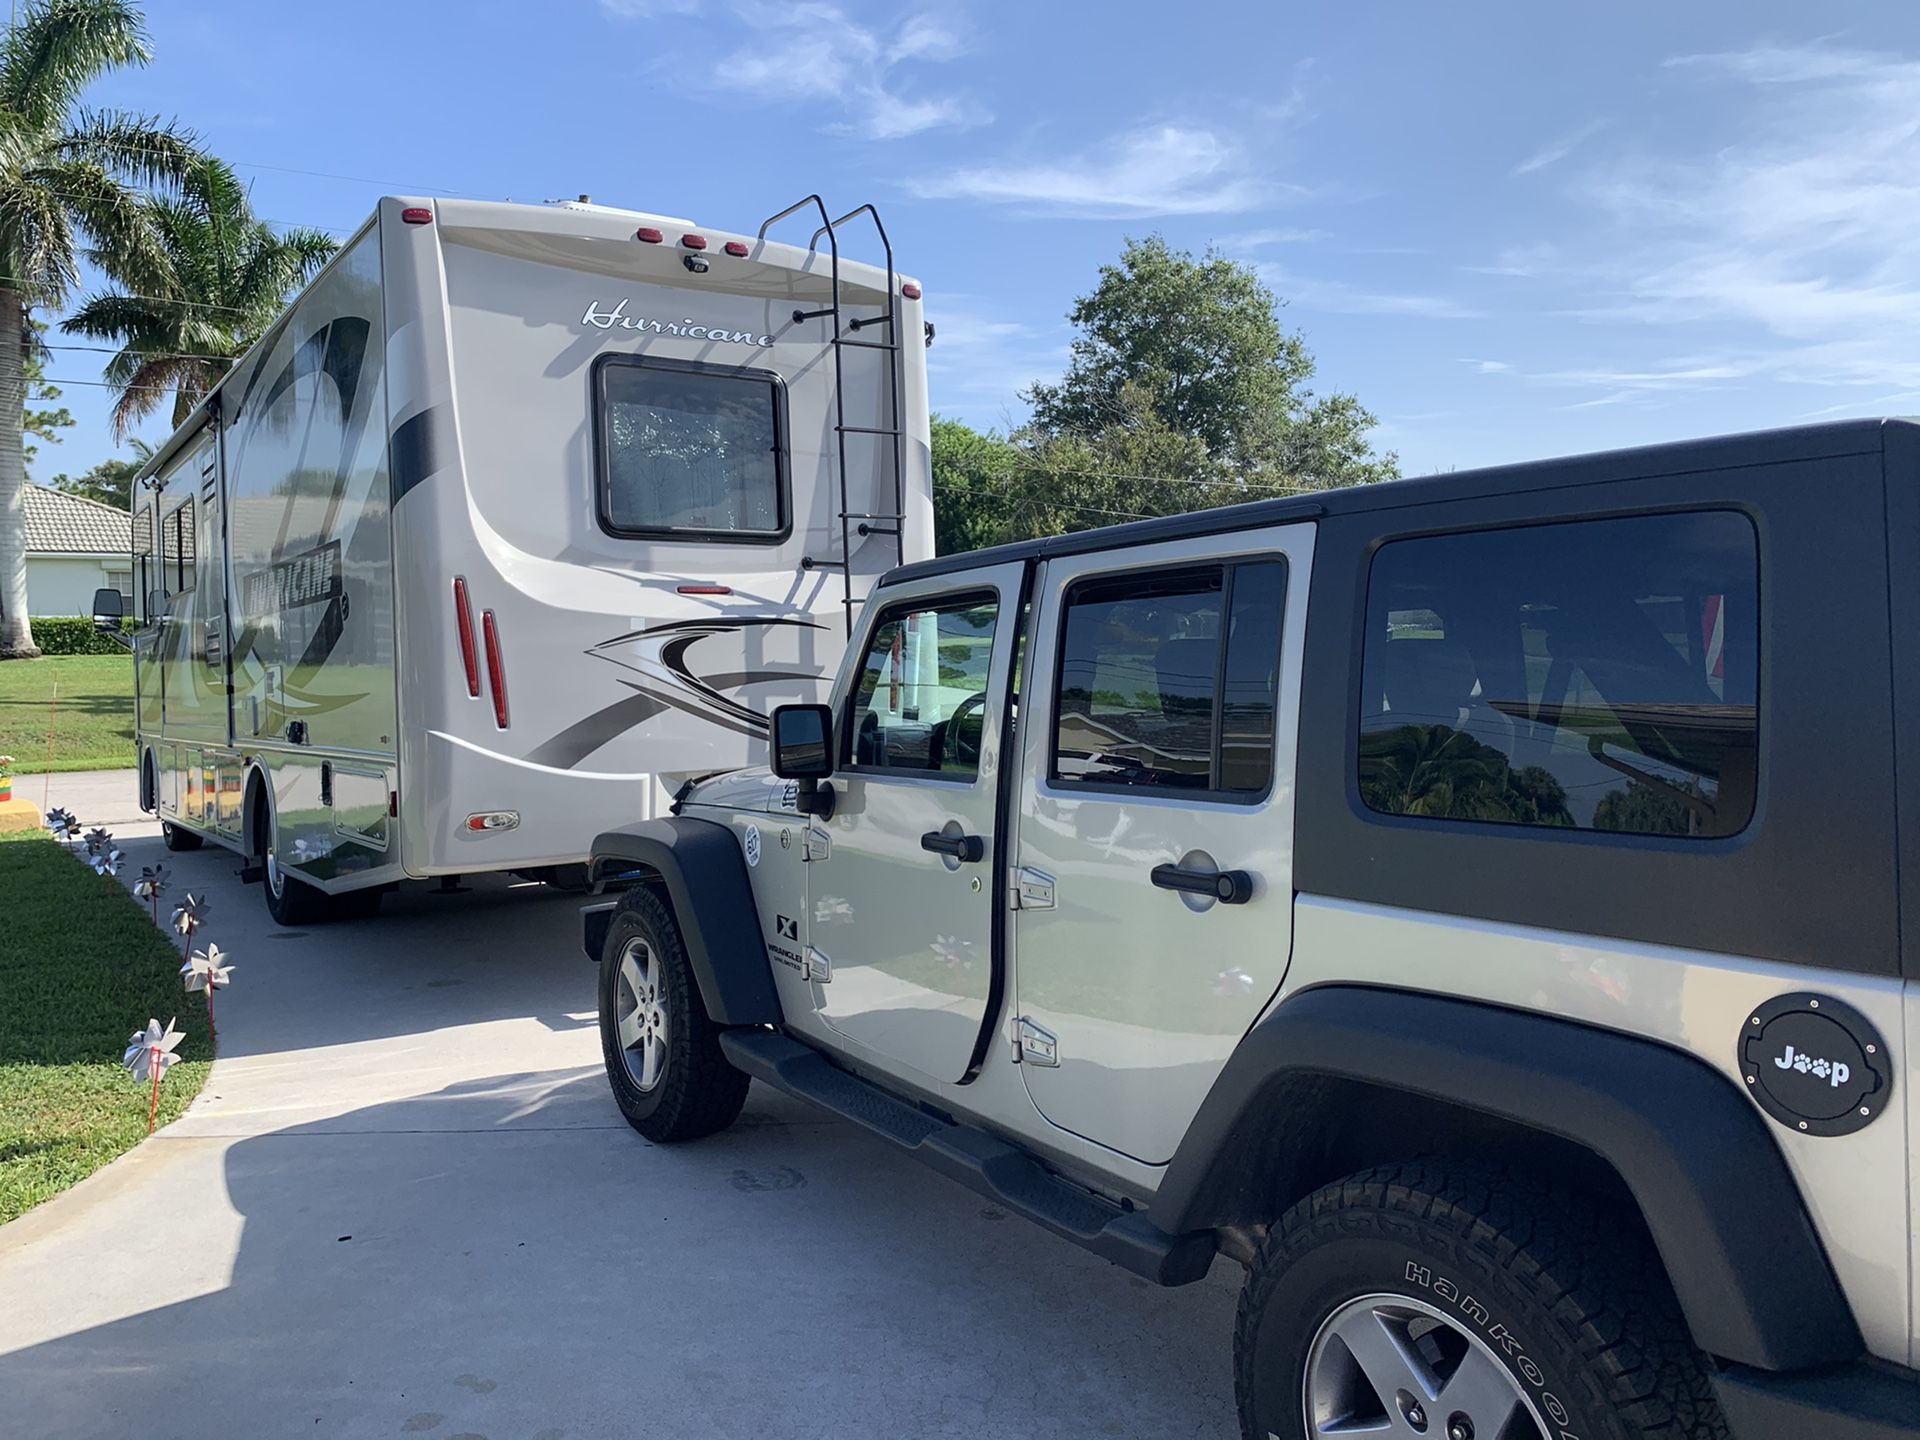 2013 hurricane door 29 feet v 10 Set the pull keep package deal only low miles,low hrs on gen, Jeep 13500 Asking 80,000